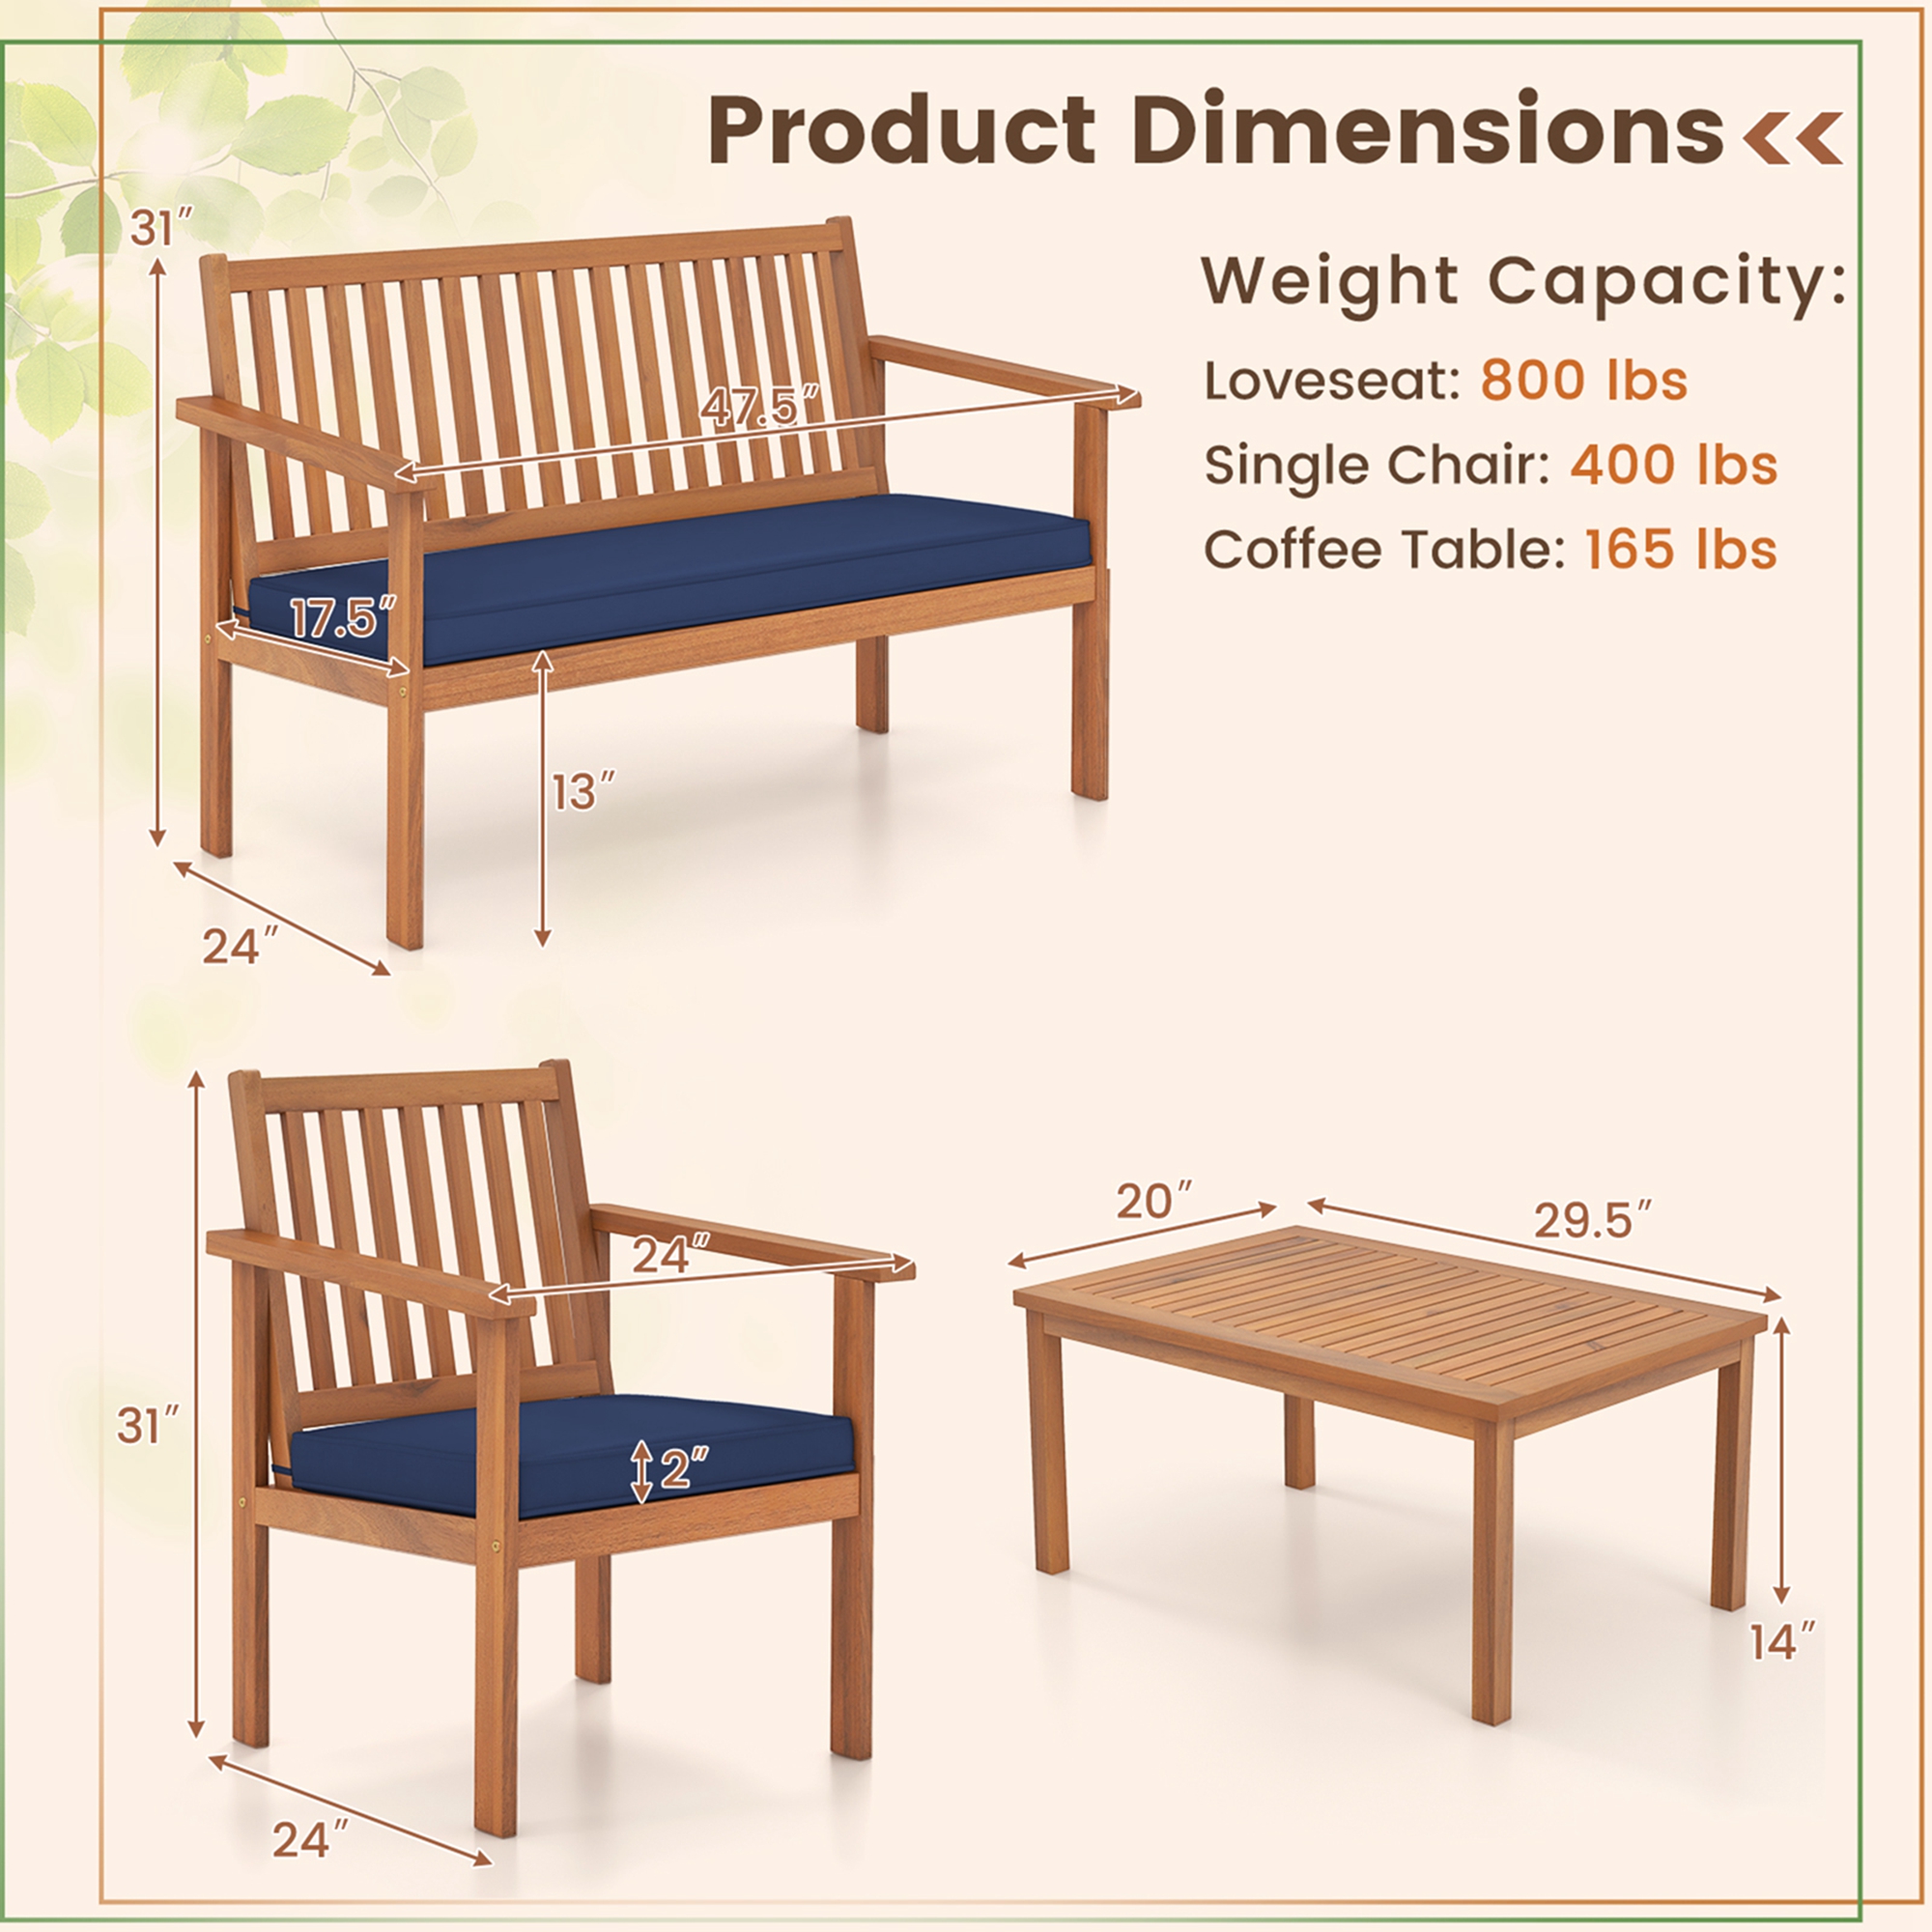 Costway 4 PCS Patio Wood Furniture Set with Loveseat, 2 Chairs & Coffee Table for Porch Navy - image 3 of 10